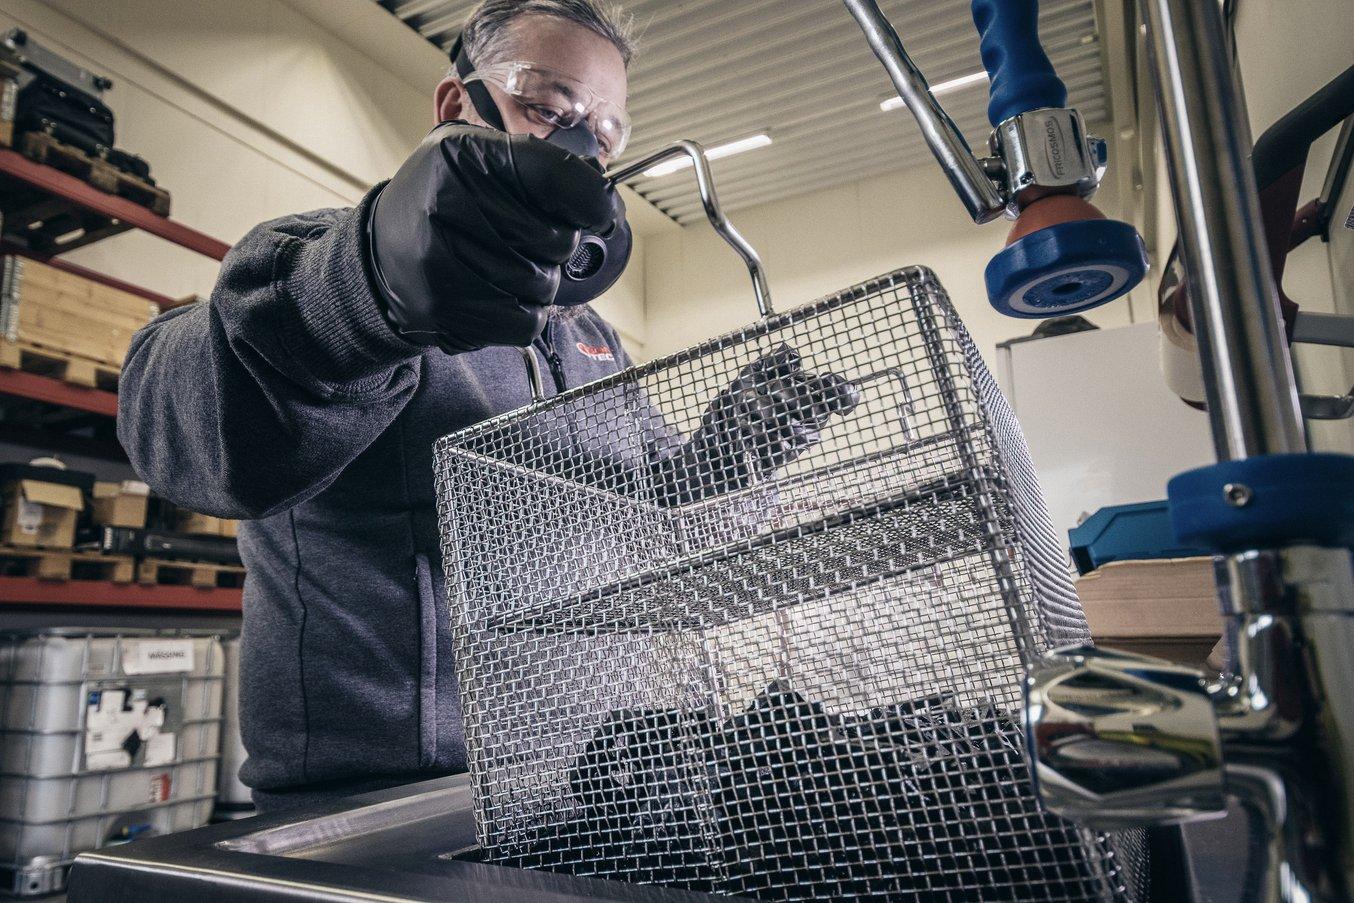 A man lifts a wire basket containing 3D printed parts out from a holding area.